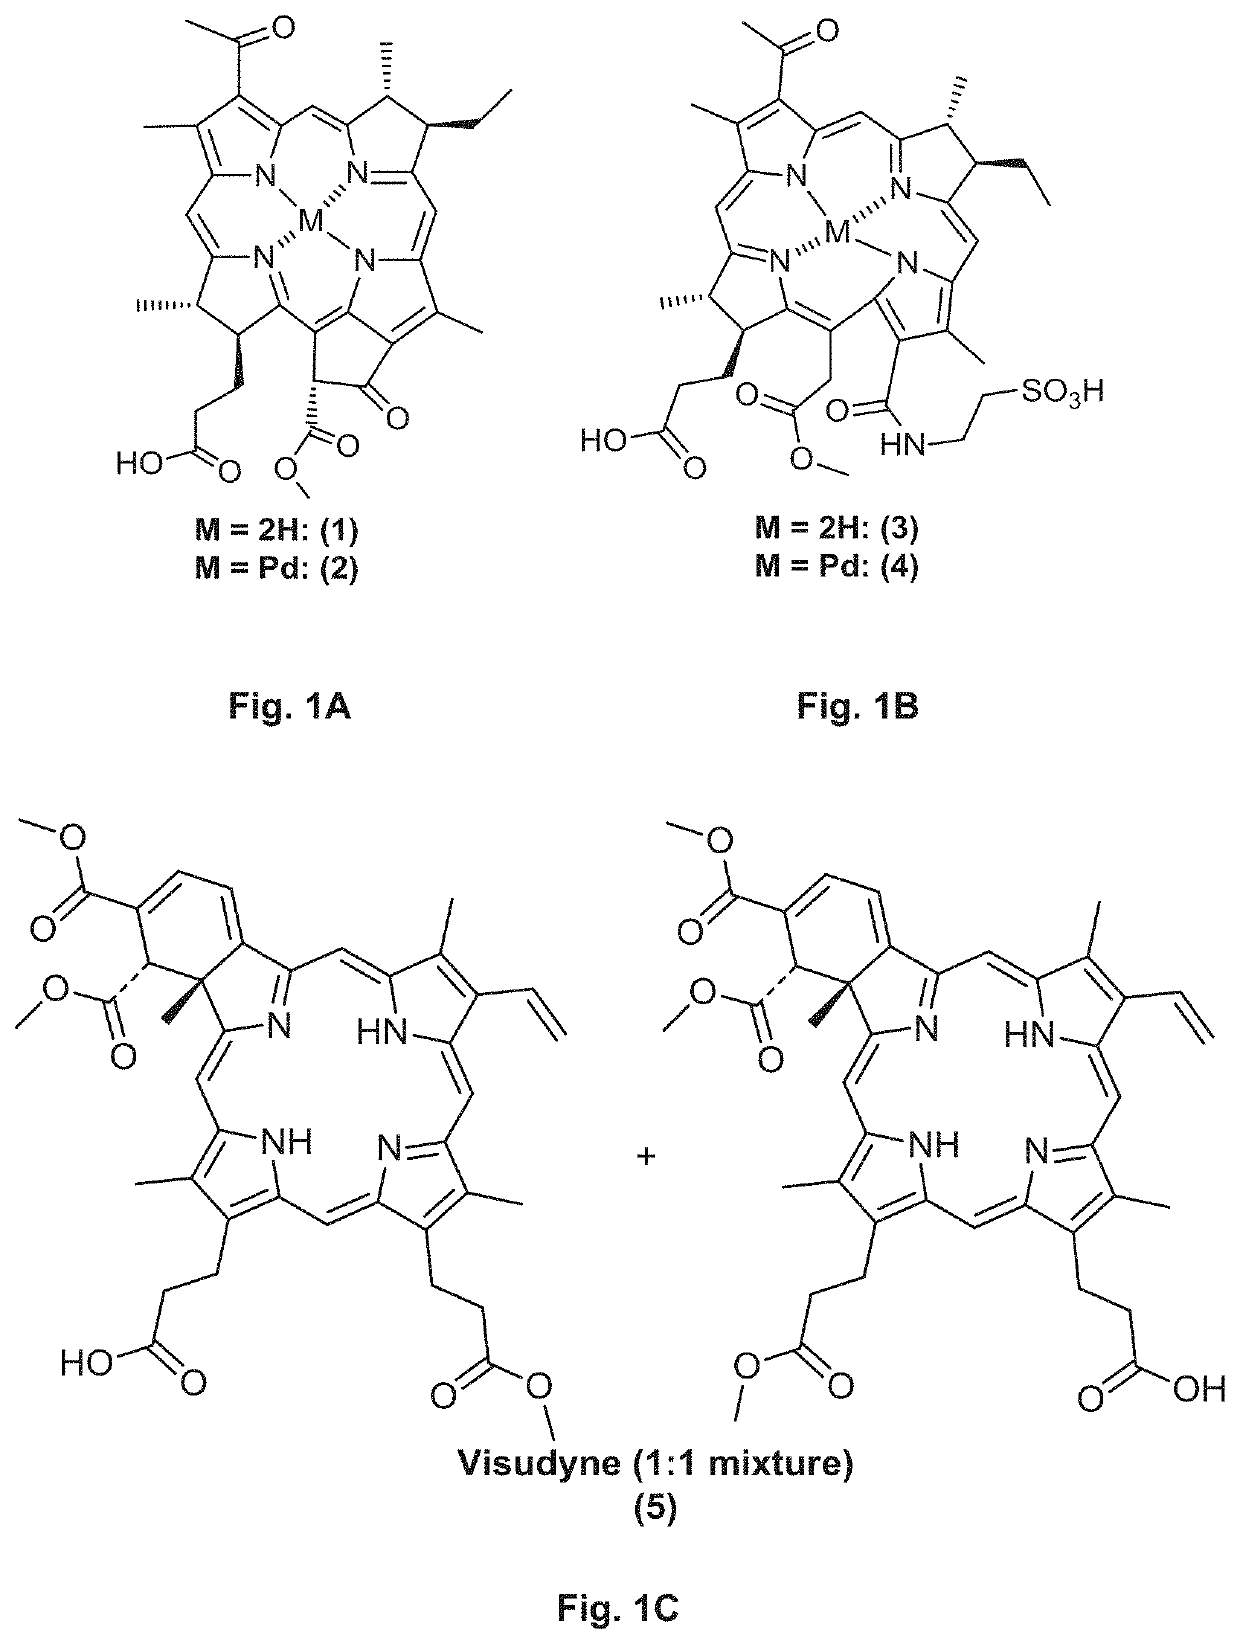 Synthesis and composition of photodynamic therapeutic agents for the targeted treatment of cancer